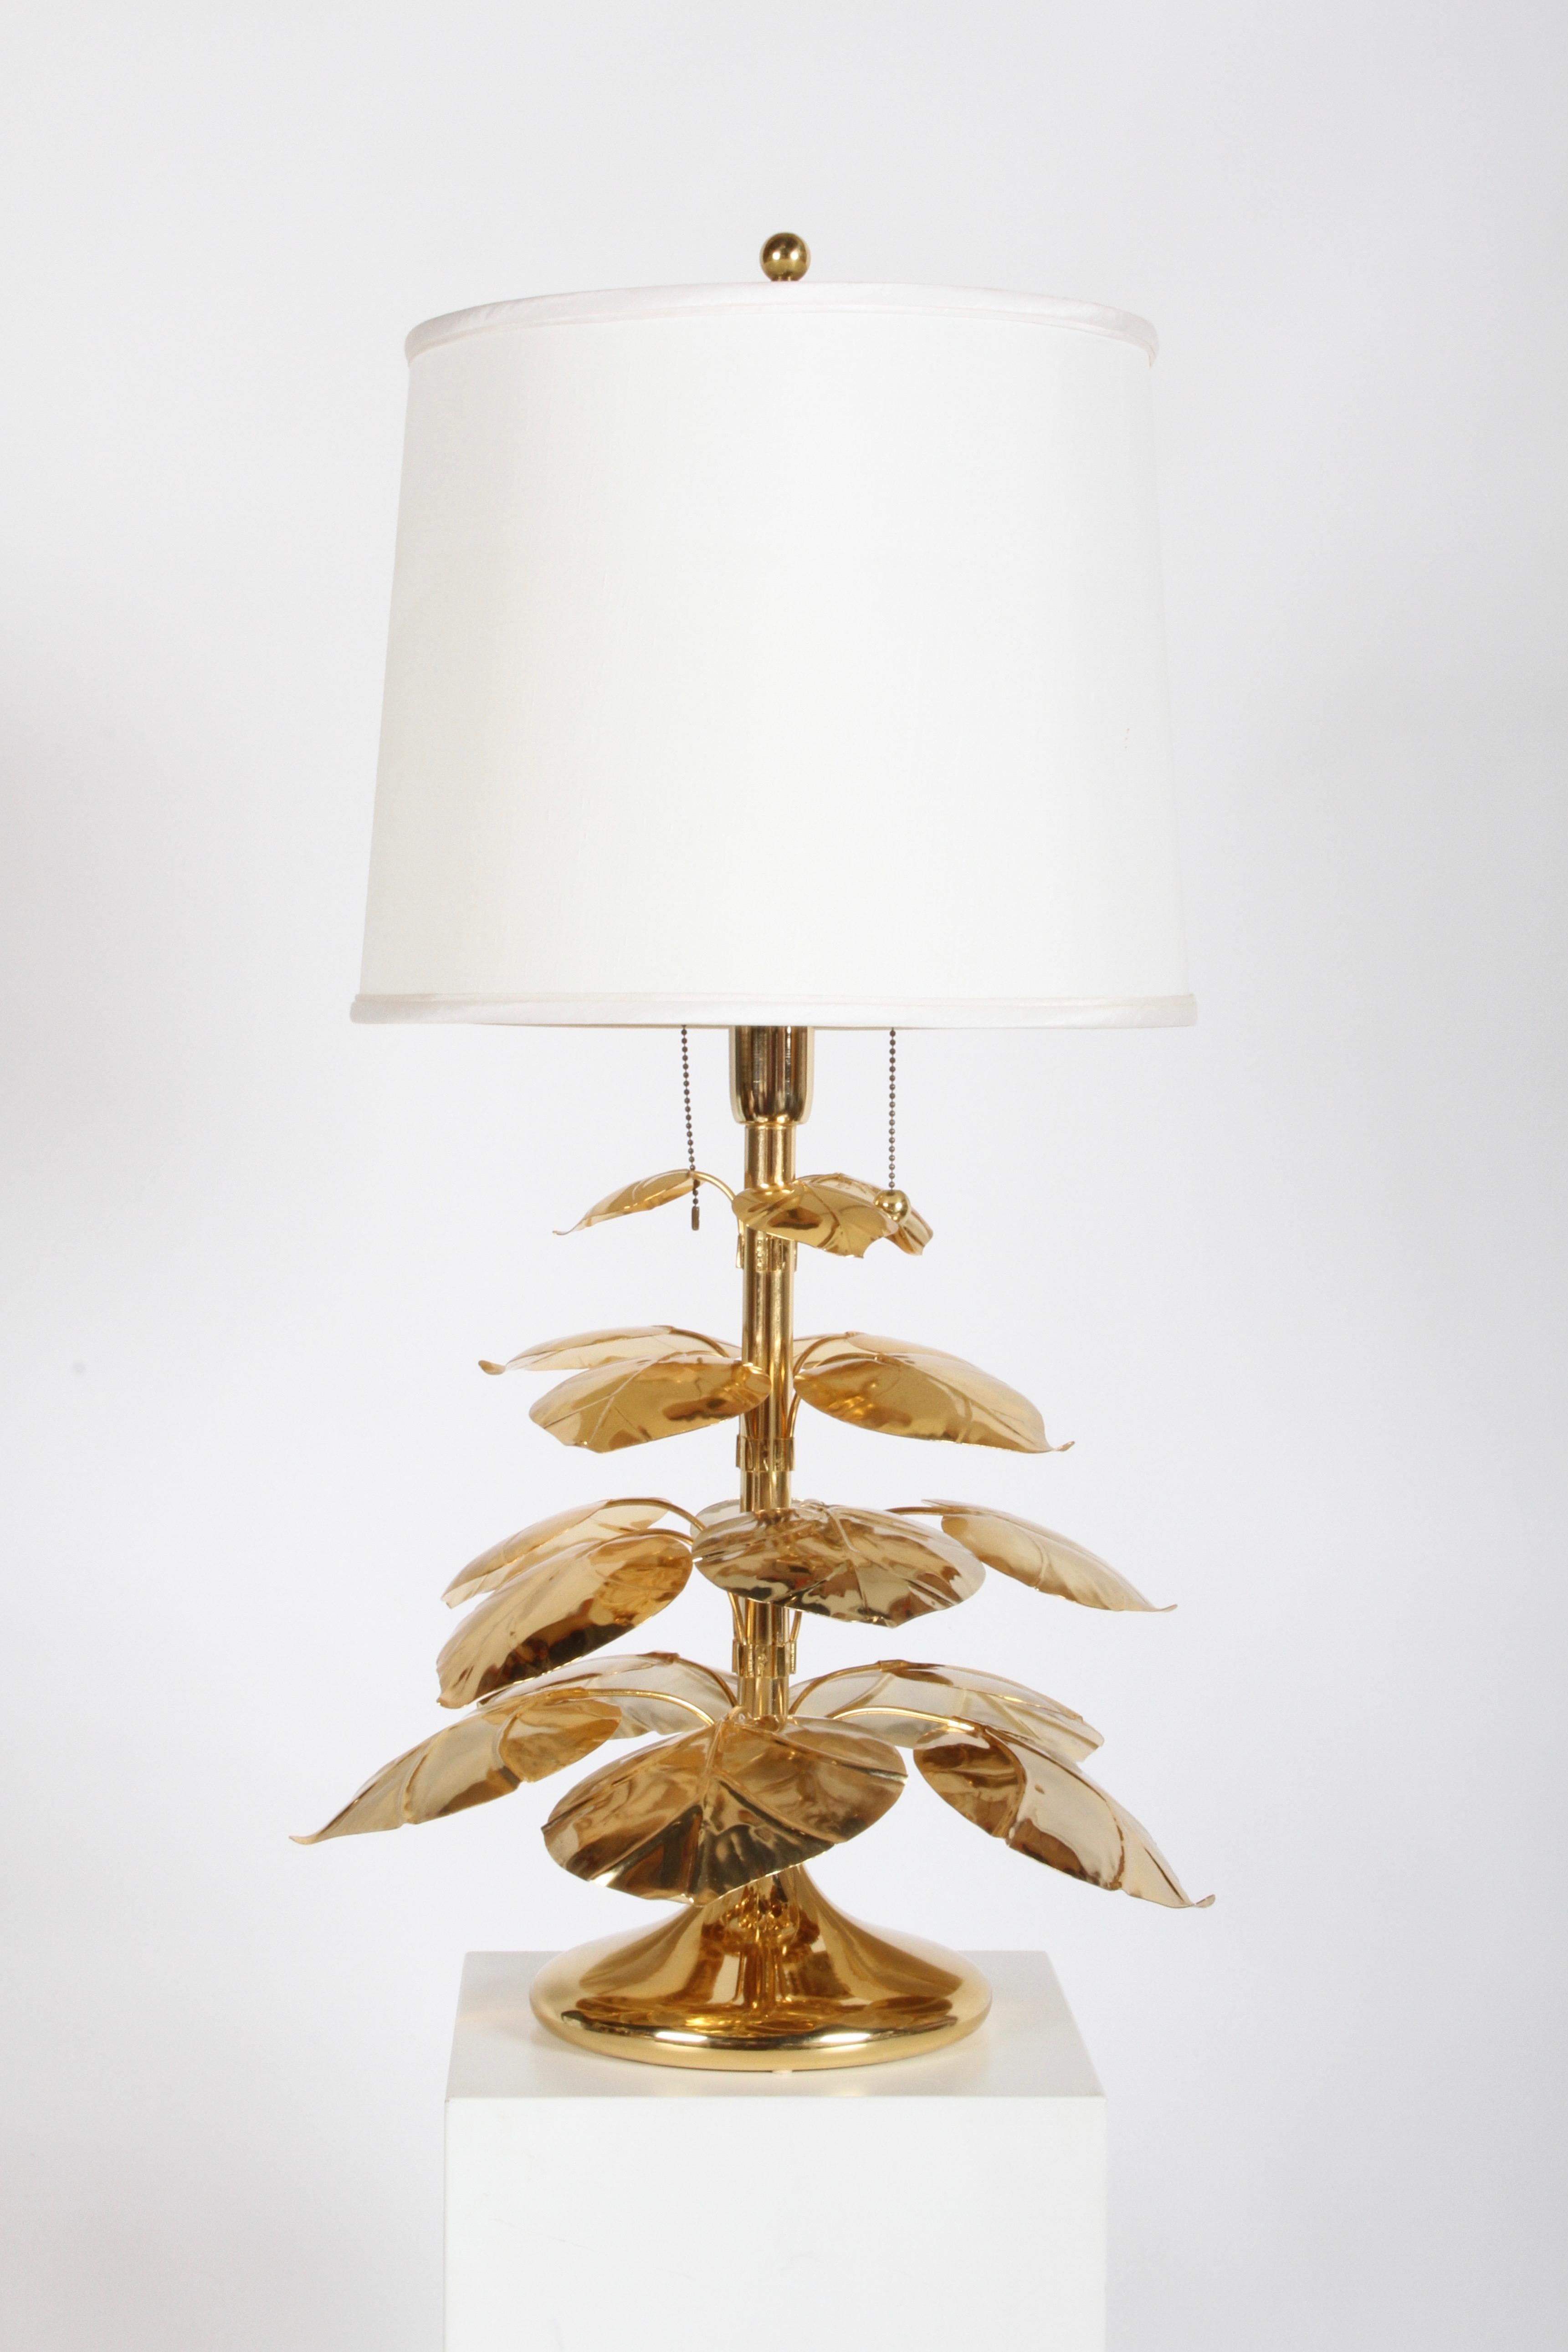 Unique stylized Hollywood Regency Italian 24-karat gold-plated table lamp with tiered Rhubard leaves on tulip form base. Various sized leaves, top tier leaves measure 3.25